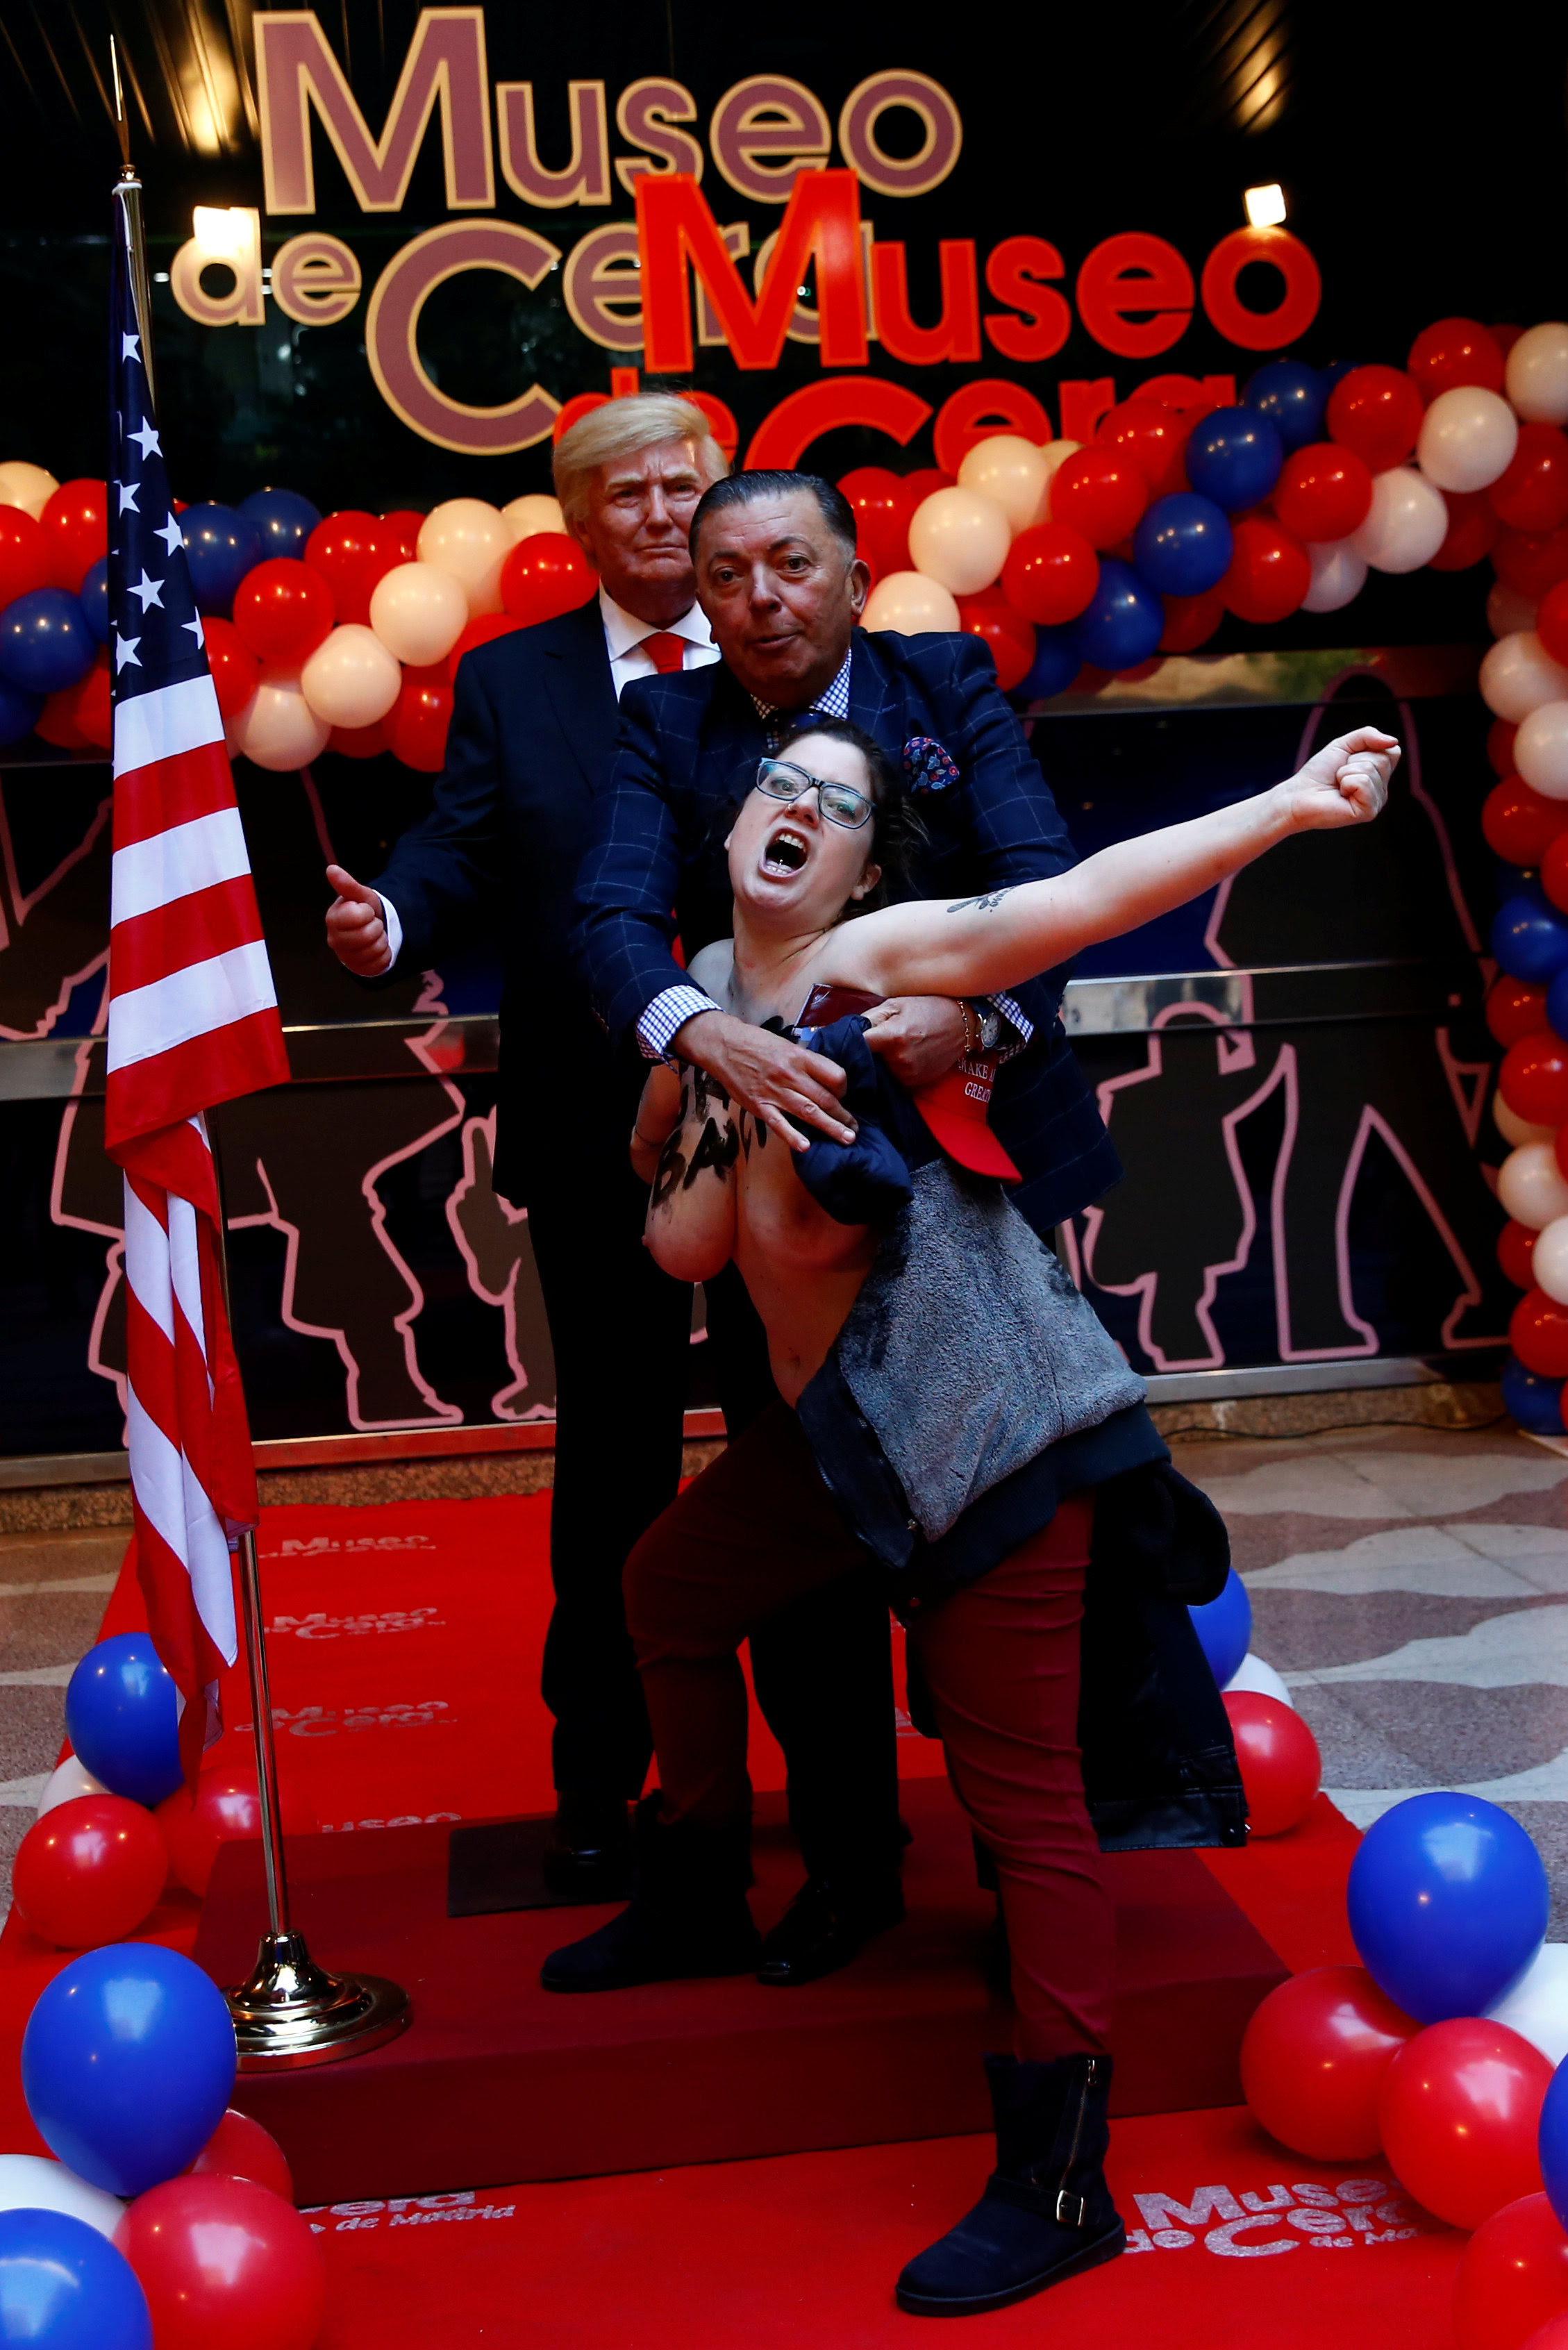 A museum worker tries to stop a topless activist from the feminist group FEMEN from grabbing the crotch of a life-sized wax statue of U.S. President-elect Donald Trump during an unveiling ceremony at Madrid's wax museum in Madrid, Spain, January 17, 2017. REUTERS/Susana Vera TEMPLATE OUT